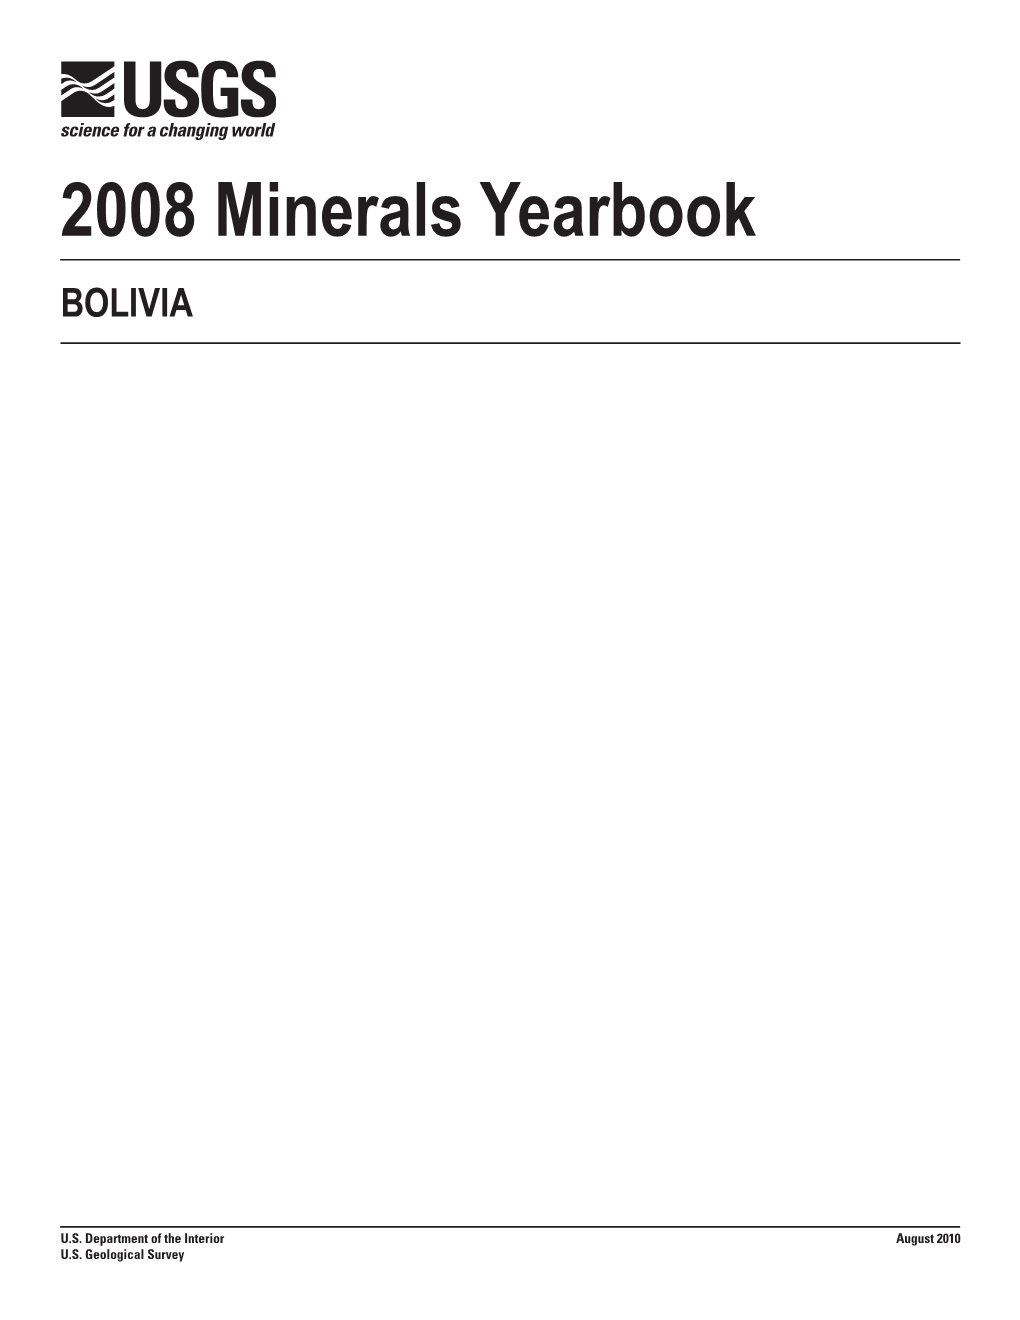 The Mineral Industry of Bolivia in 2008